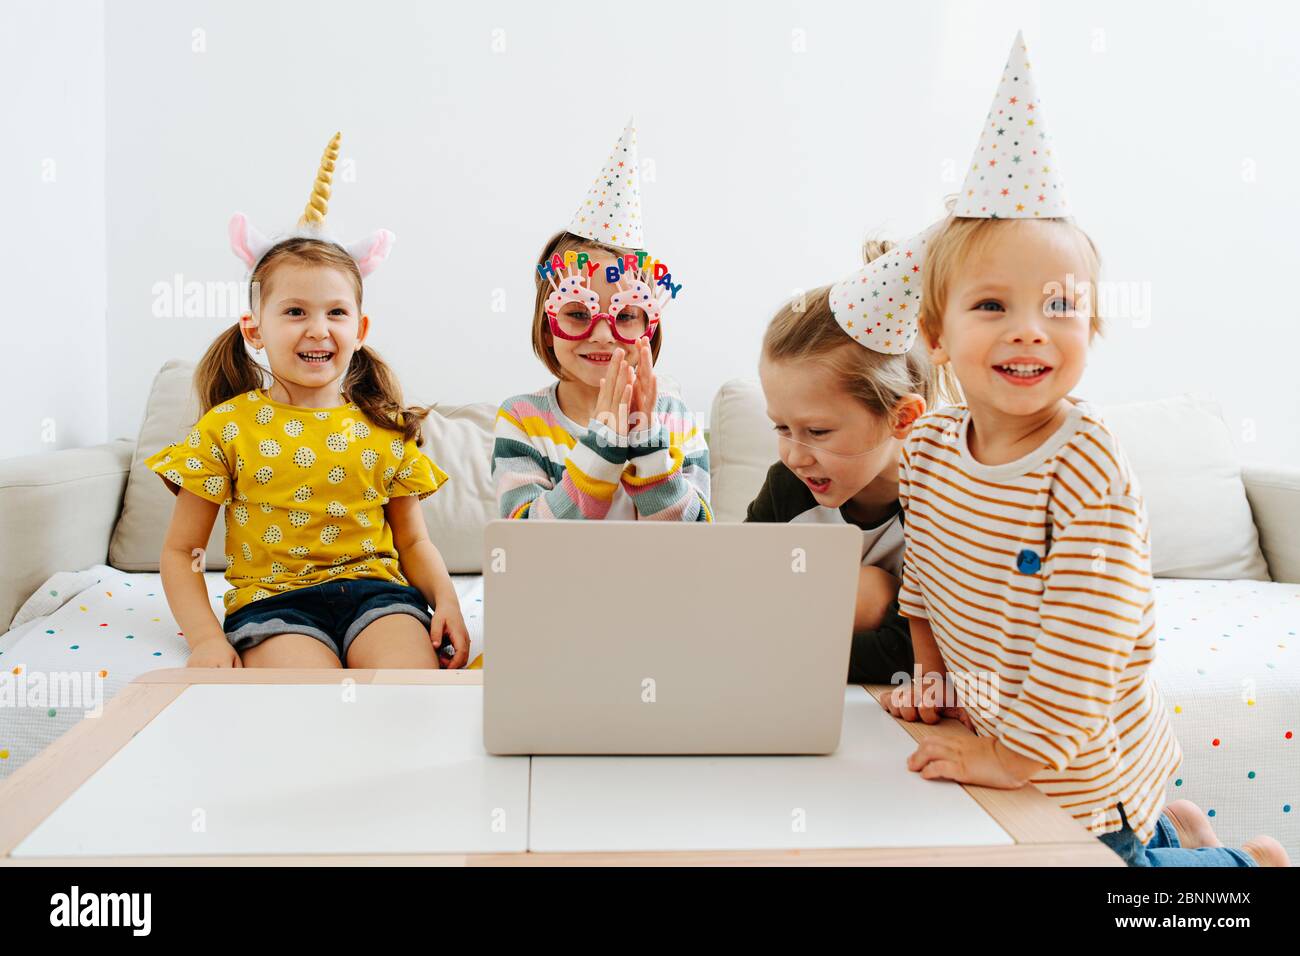 Happy kids in party hats celebrating birthday online on a quarantine at home Stock Photo